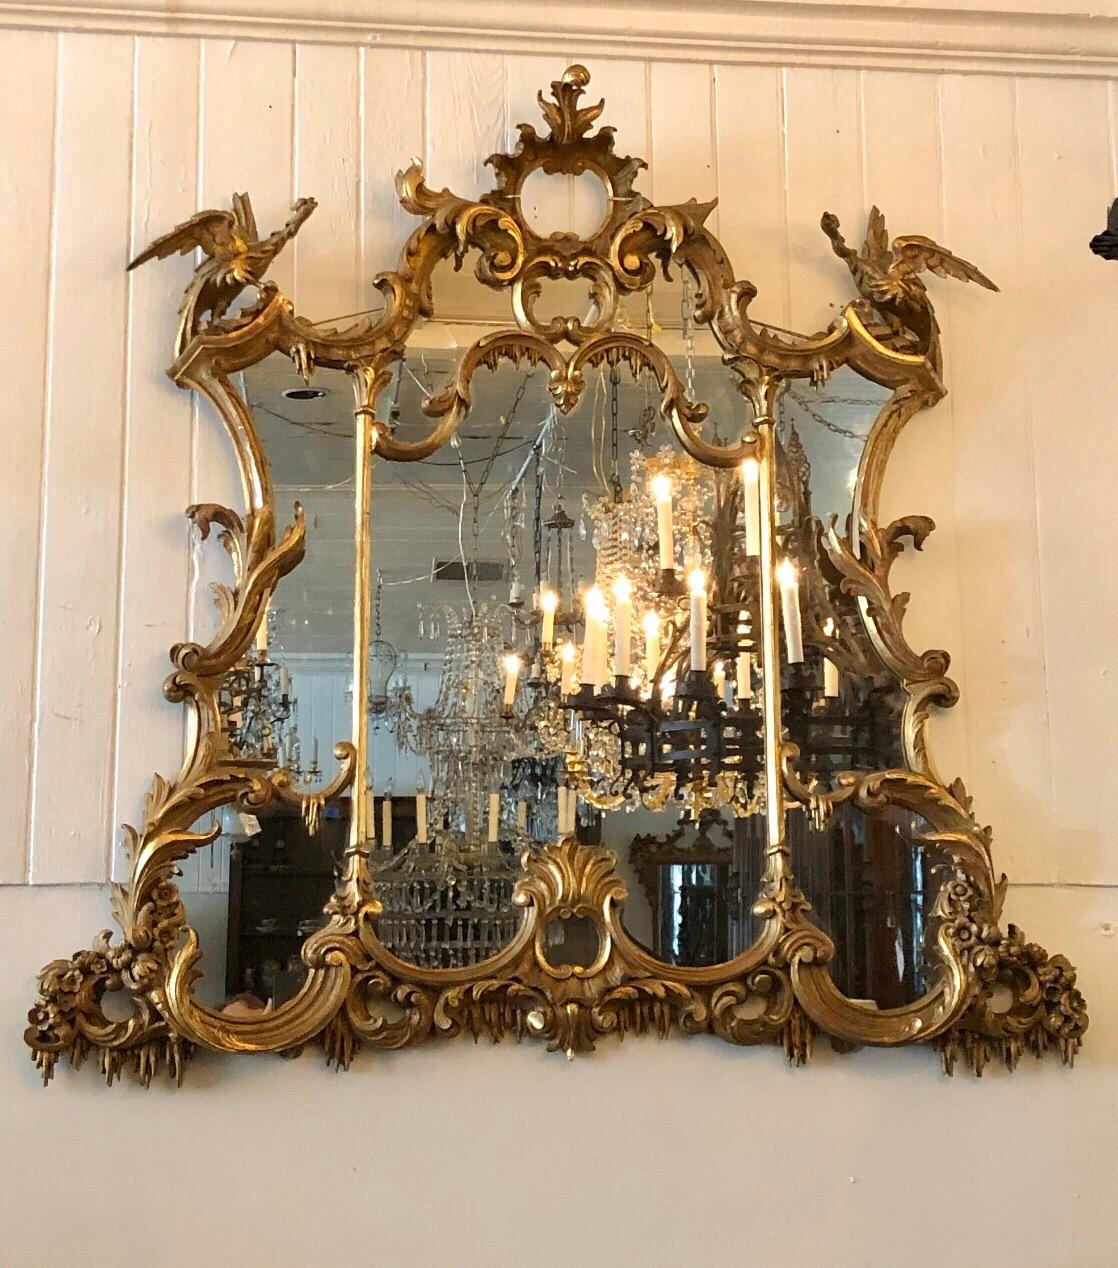 Enchanting Chinoiserie English Chippendale giltwood overmantel mirror. The Chippendale mirror is all craved giltwood with an open Center Cartouche flanked by a pair of HO HO Birds perched on pagoda roofs. This Classic Chinoiserie mirrors frame has